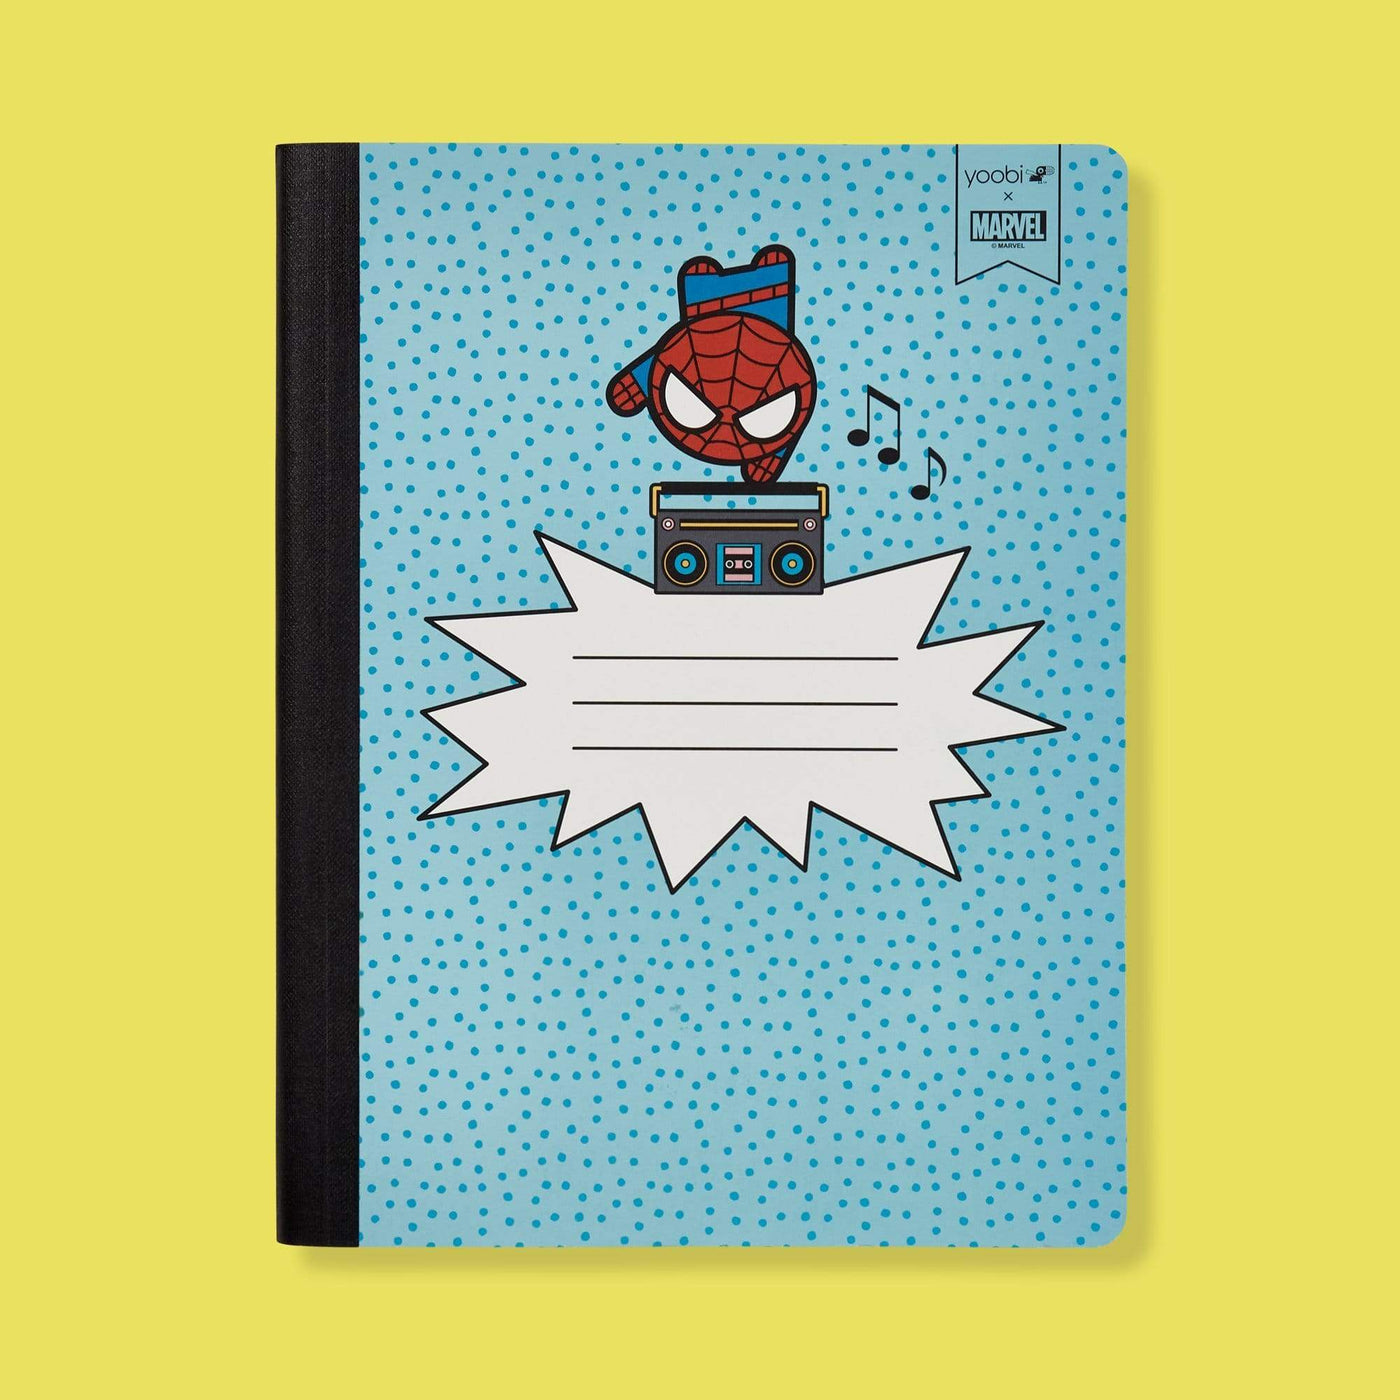 Spider-Man composition book with Spider-Man holding a boombox on front cover, light blue background